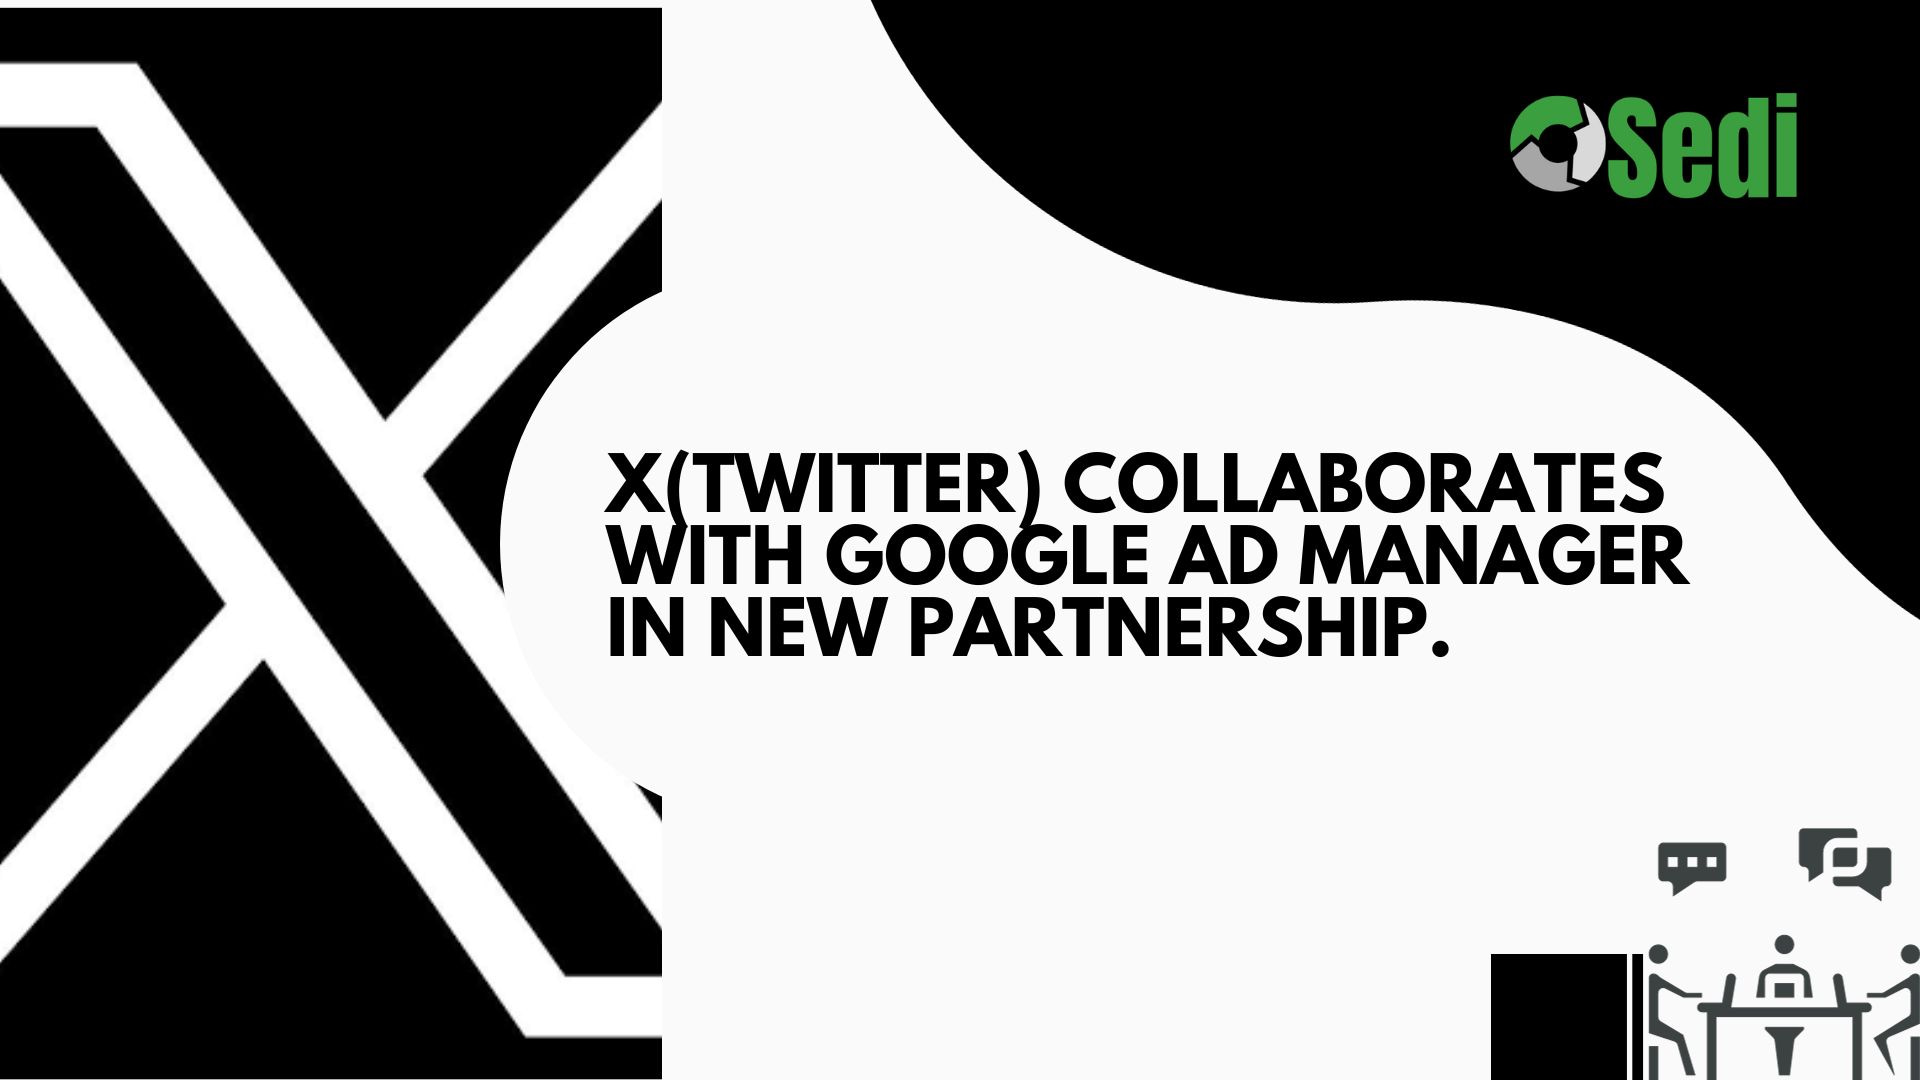 X(Twitter) collaborates with Google Ad Manager